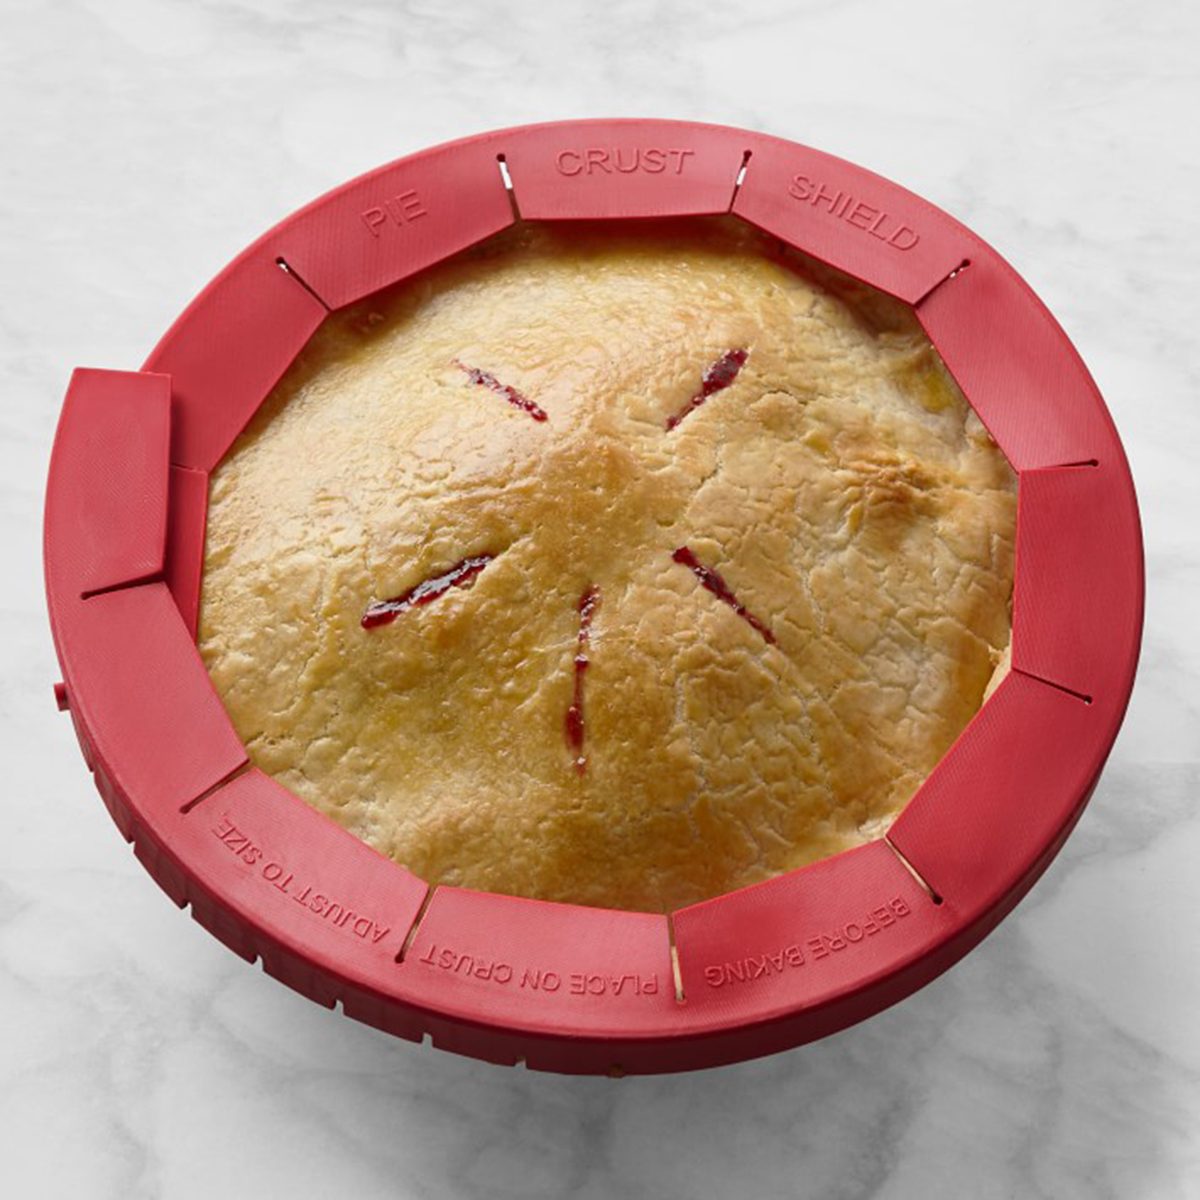 https://www.tasteofhome.com/wp-content/uploads/2021/10/Silicone-Pie-Shield.jpg?fit=700%2C700